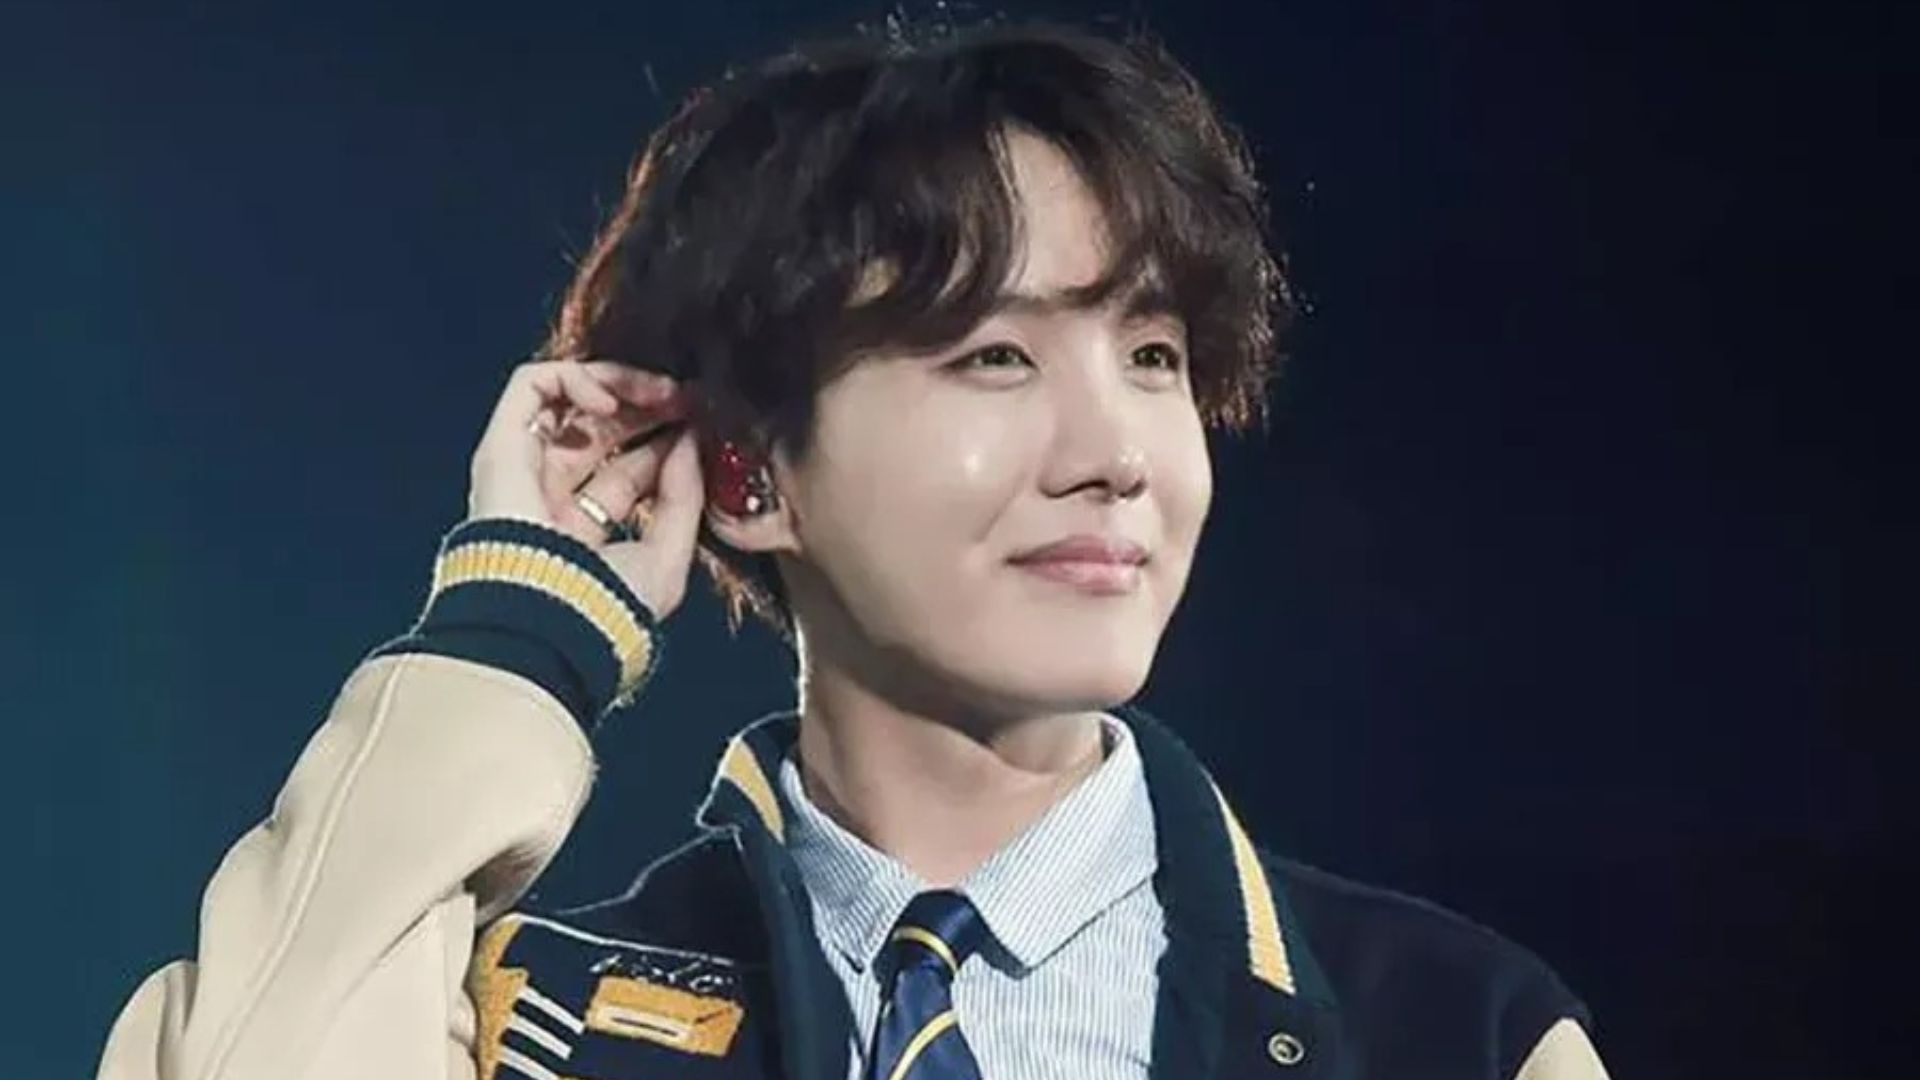 BTS' J-Hope to make history as first K-pop headliner at